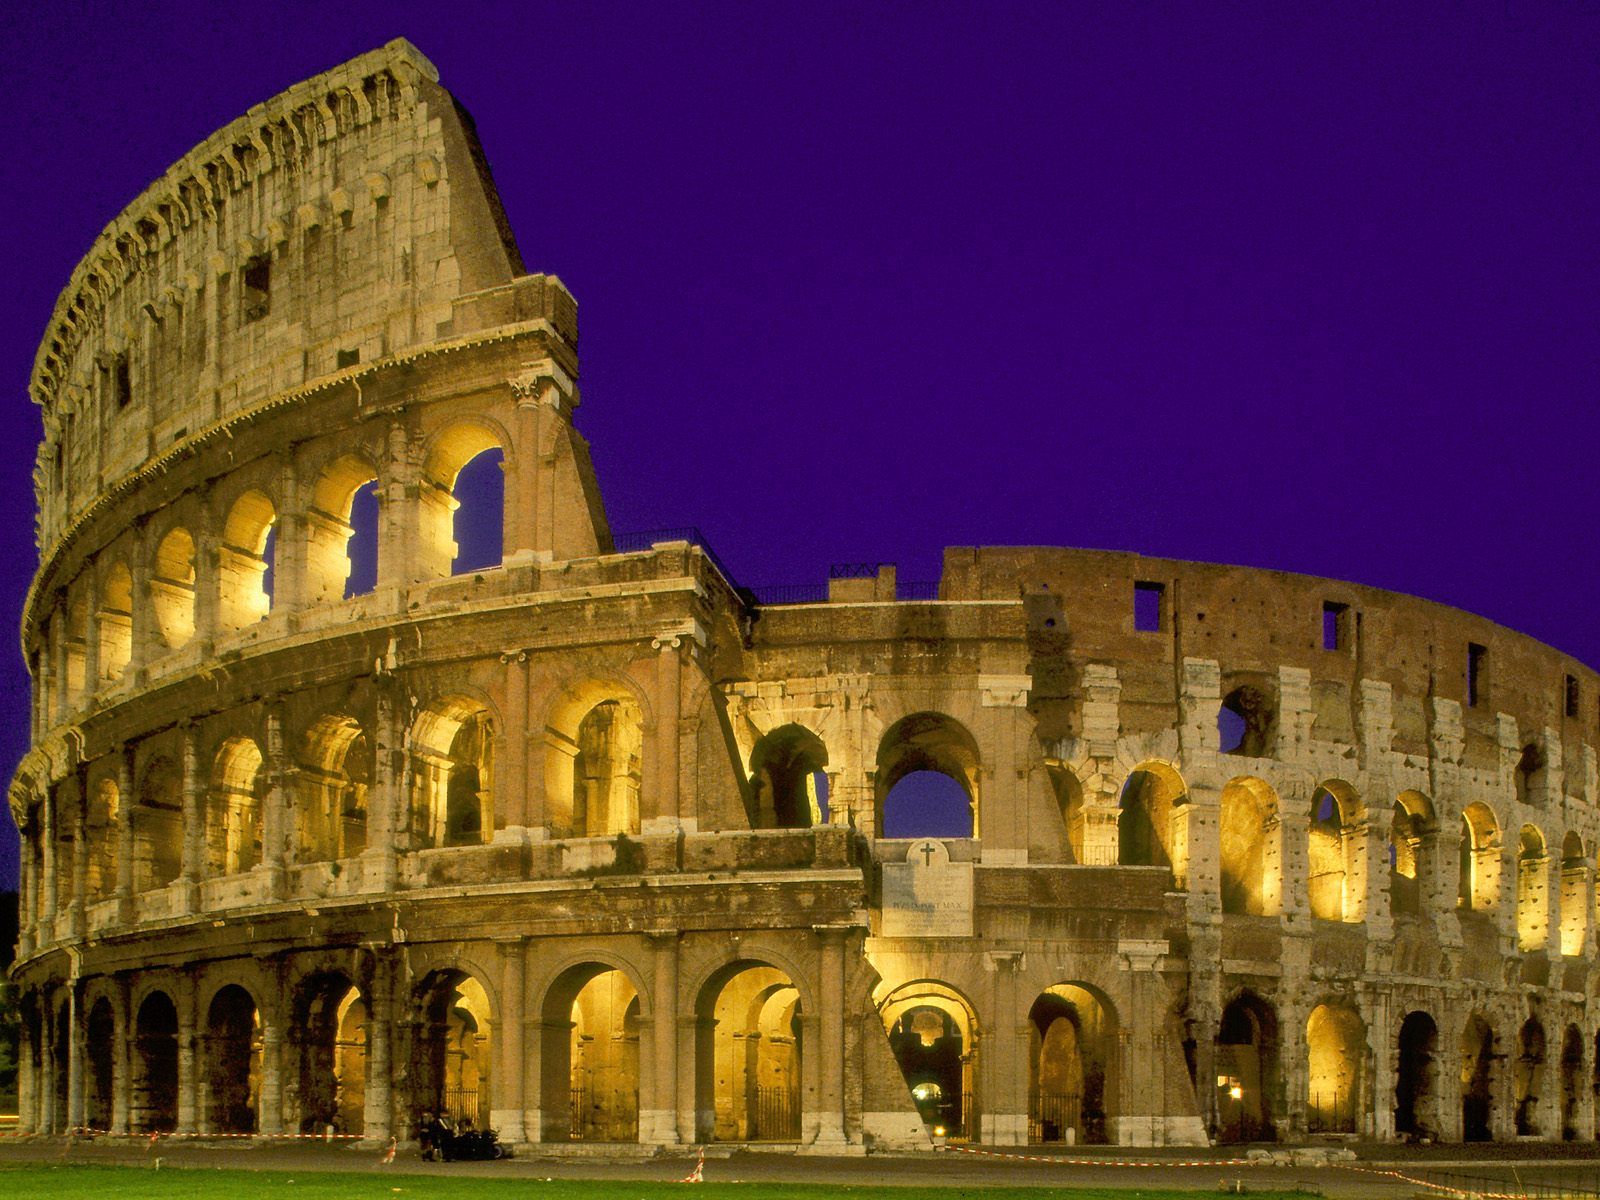 The Coliseum At Night Rome Italy Picture The Coliseum At Night Rome